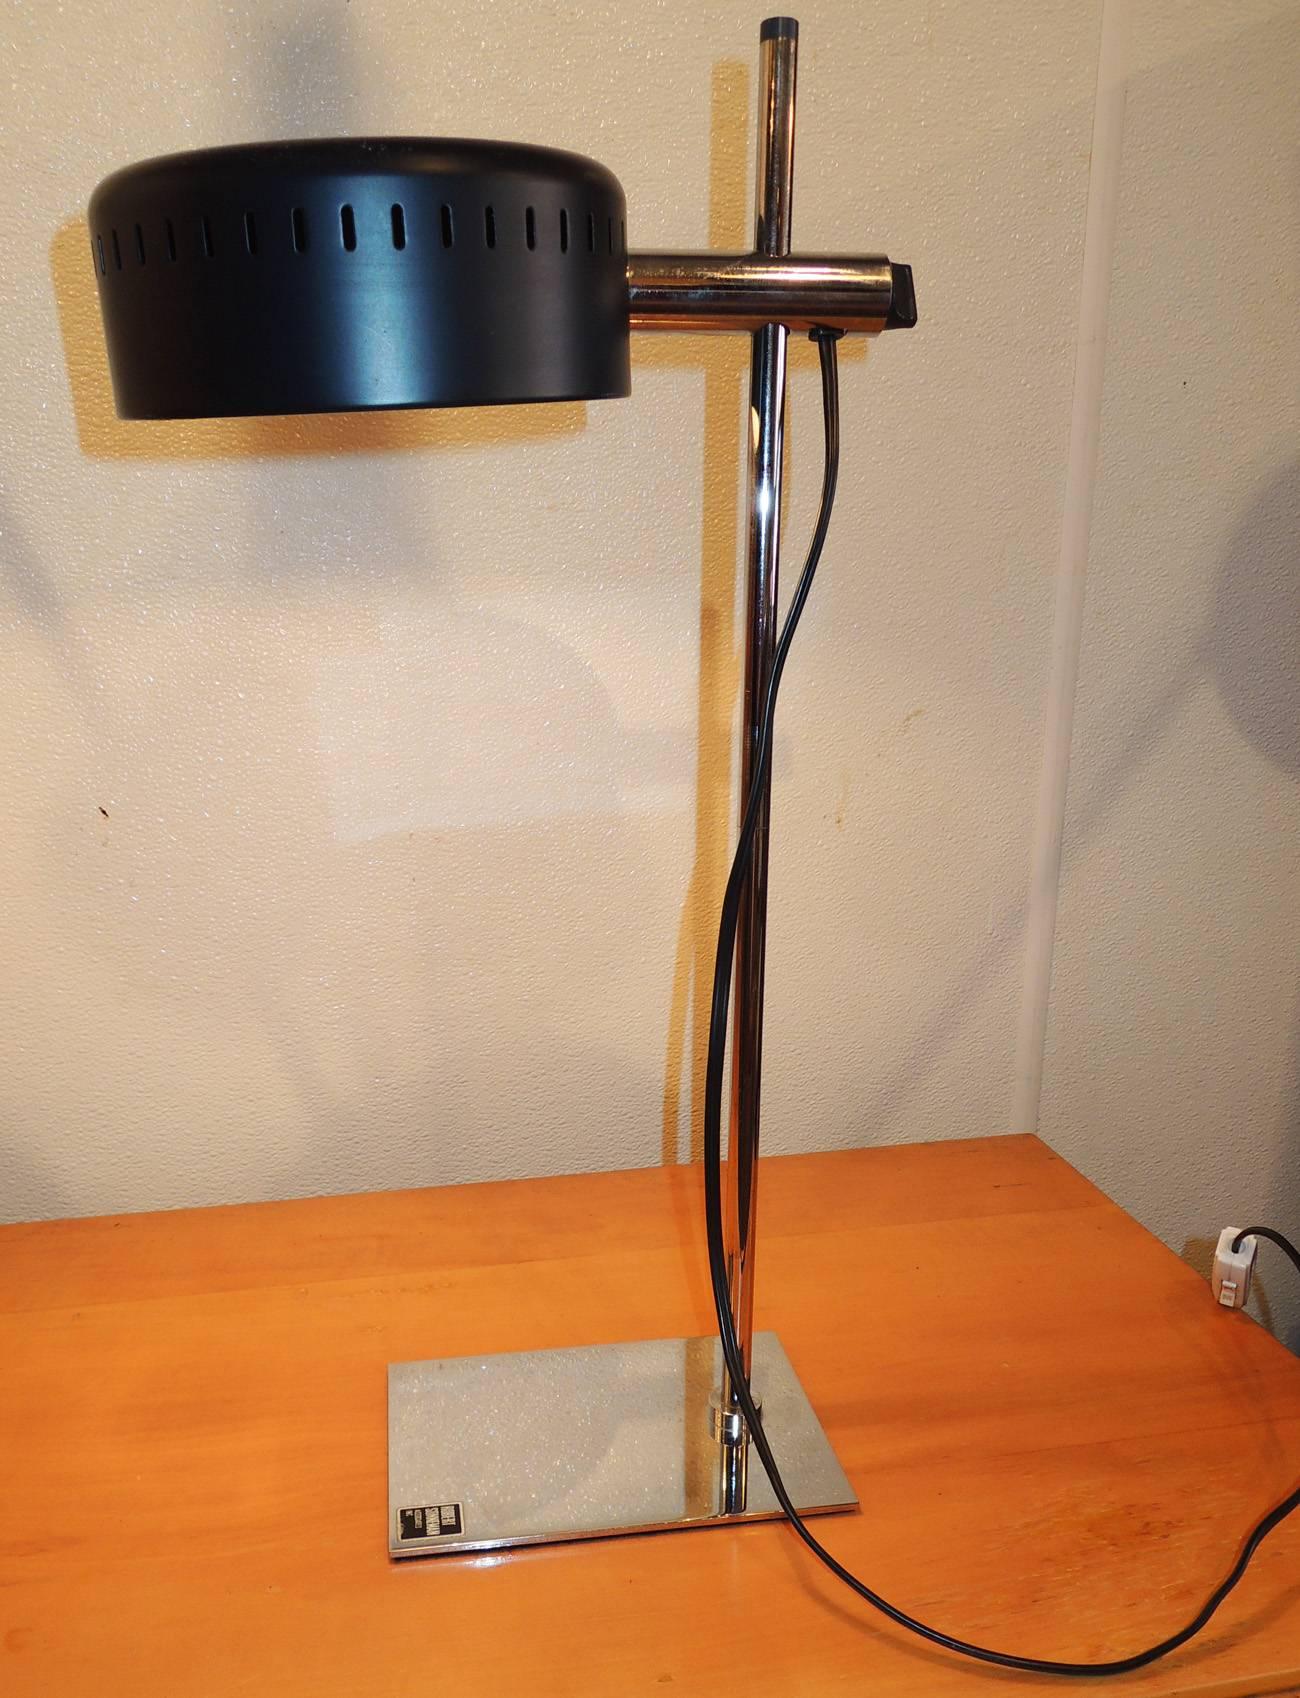 Adjustable table lamp from now-iconic designer Robert Sonneman. Black metal shade adjusts up and down along chrome rod. Original company label on base.